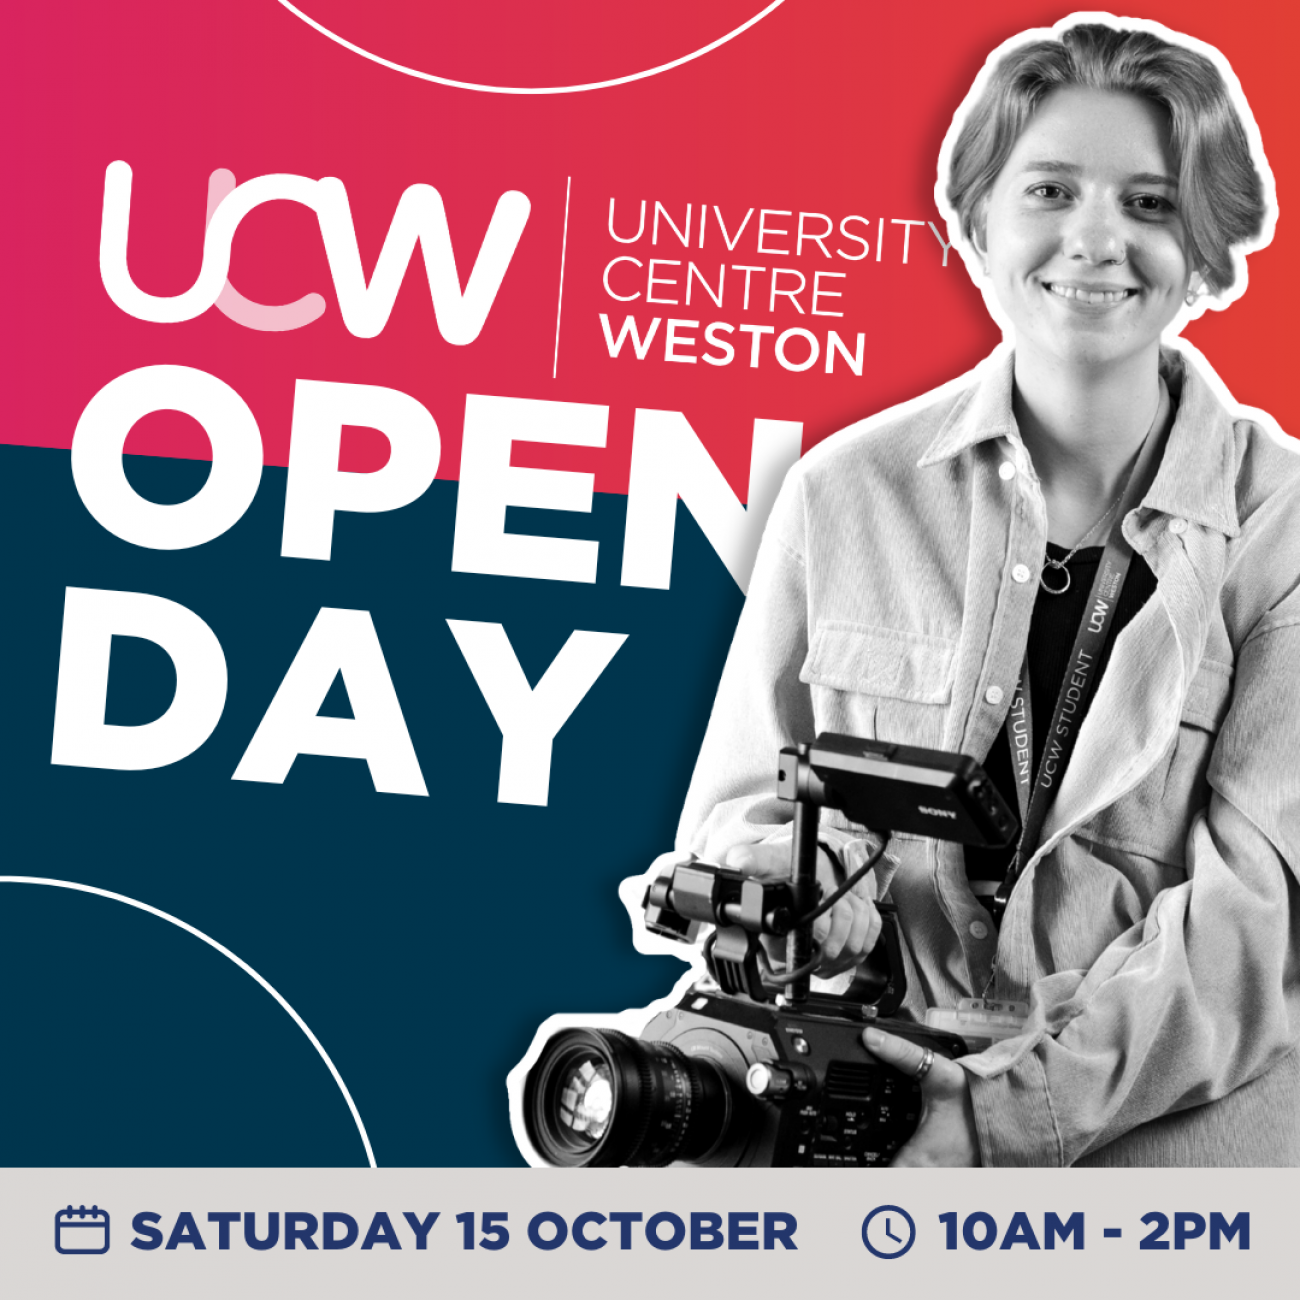 ucw open day